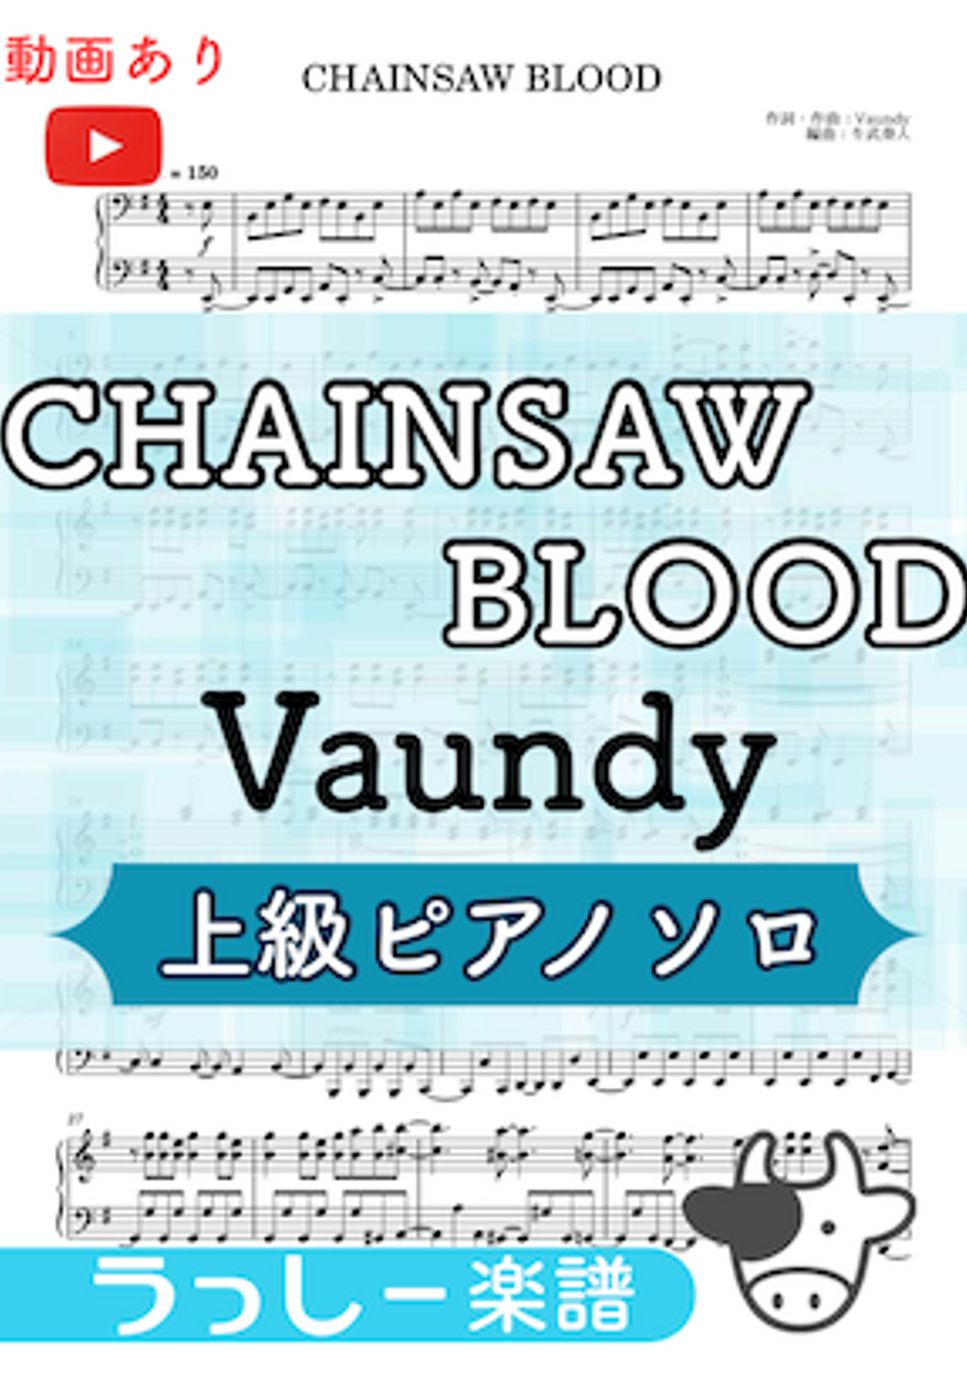 Vaundy - CHAINSAW BLOOD (アニメ《チェンソーマン》主題歌) by 牛武奏人